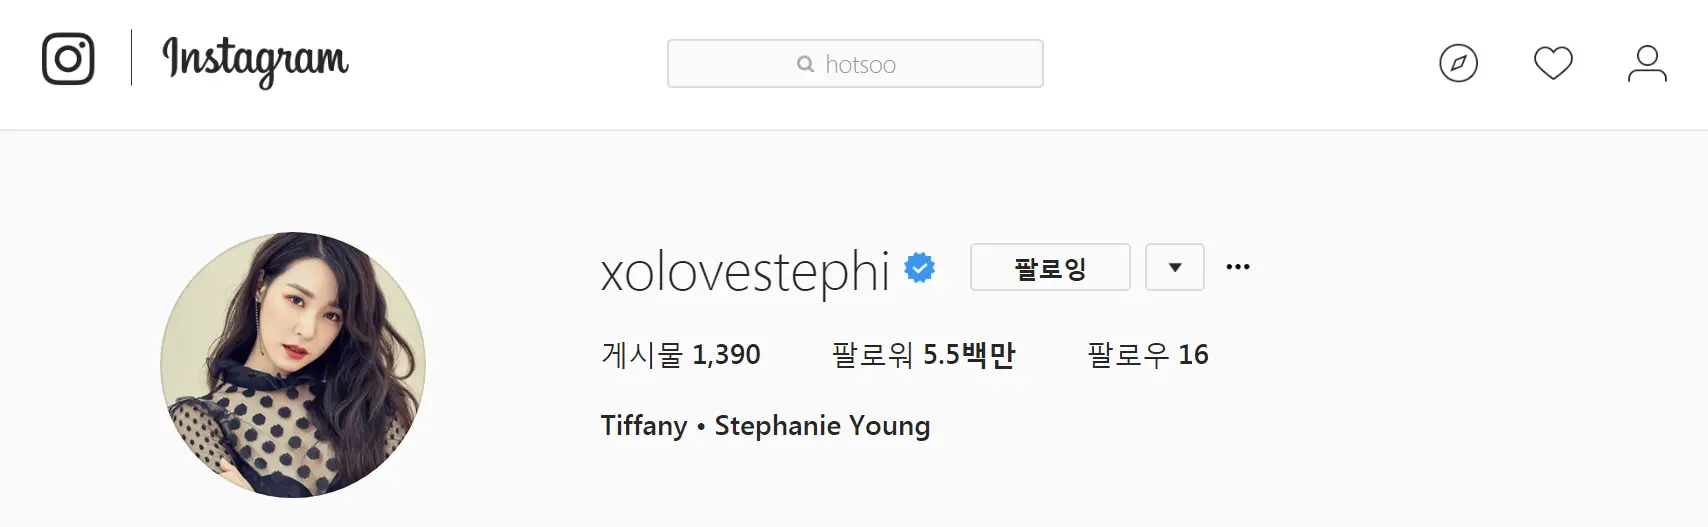 Sooyoung And Tiffany Removed Girls Generation Name From Their